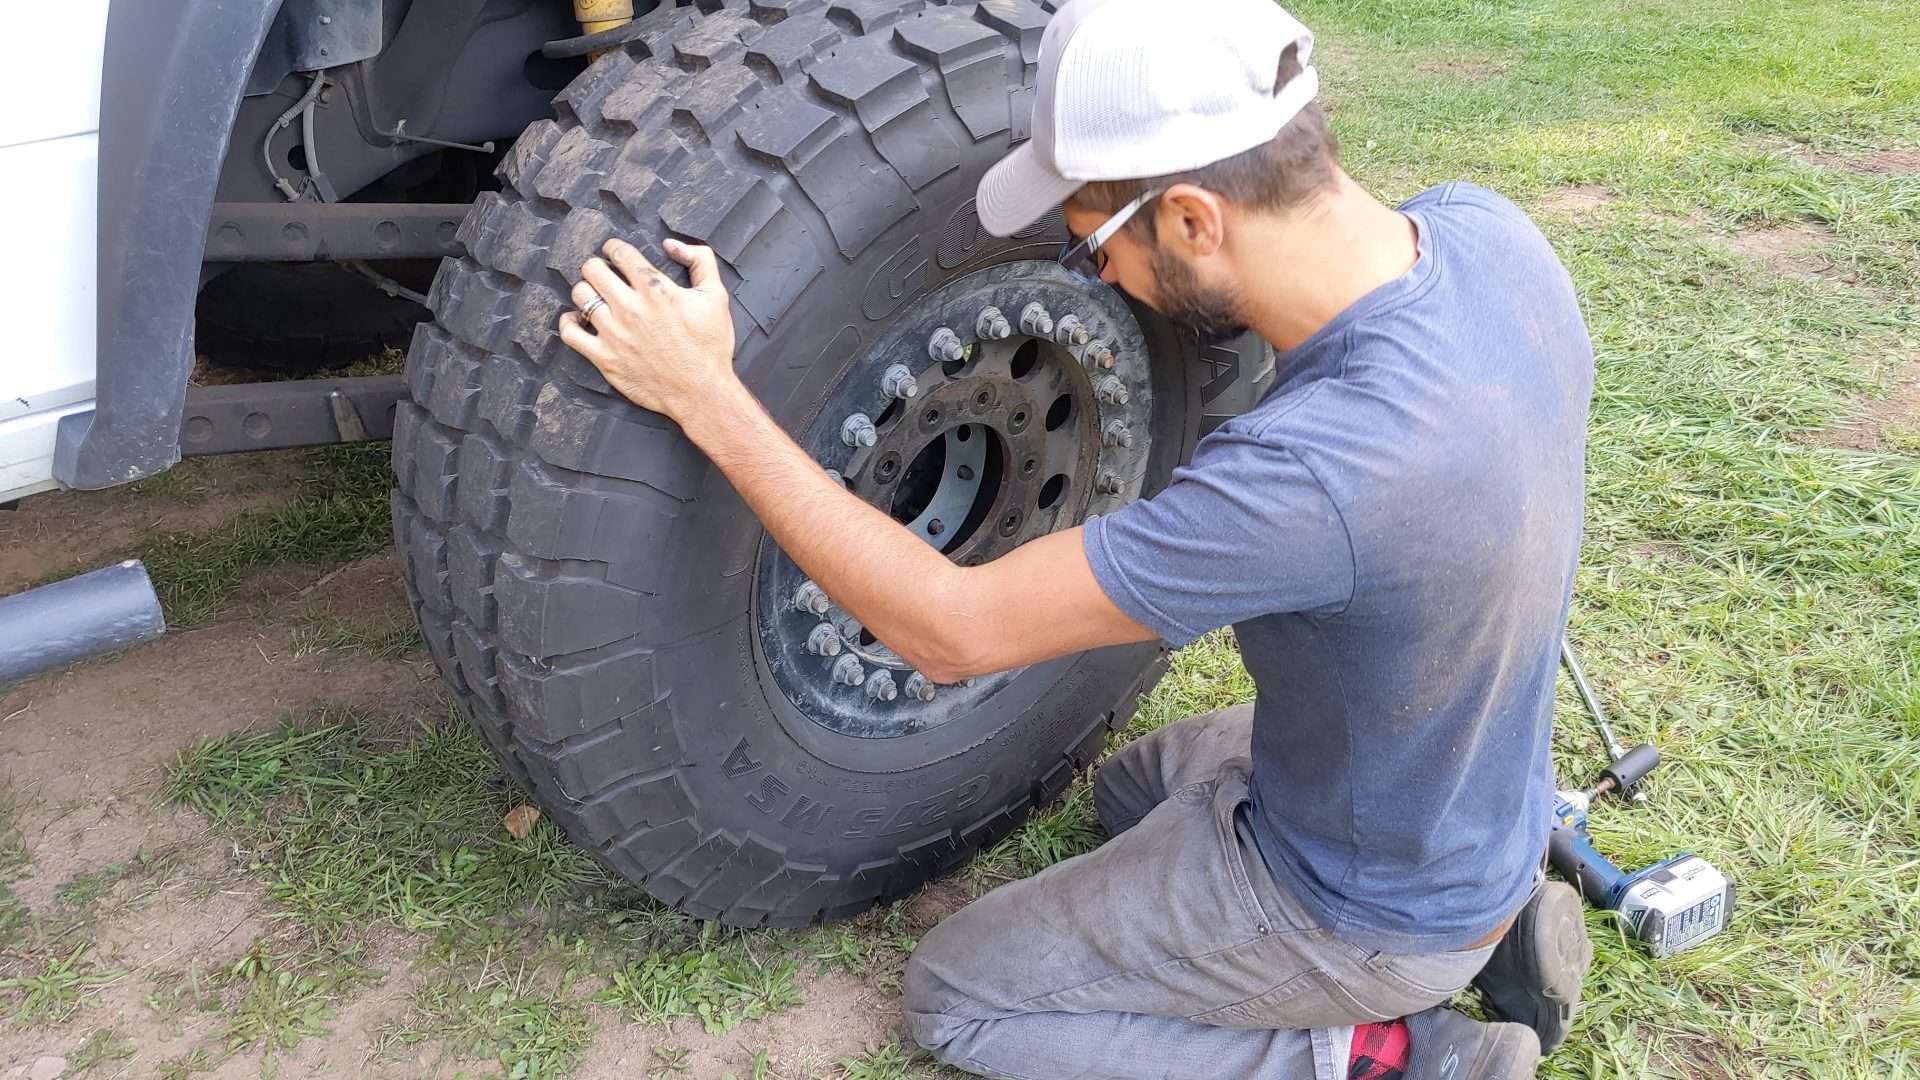 Tom rotating tires and installing wheel balancers on their overland truck camper